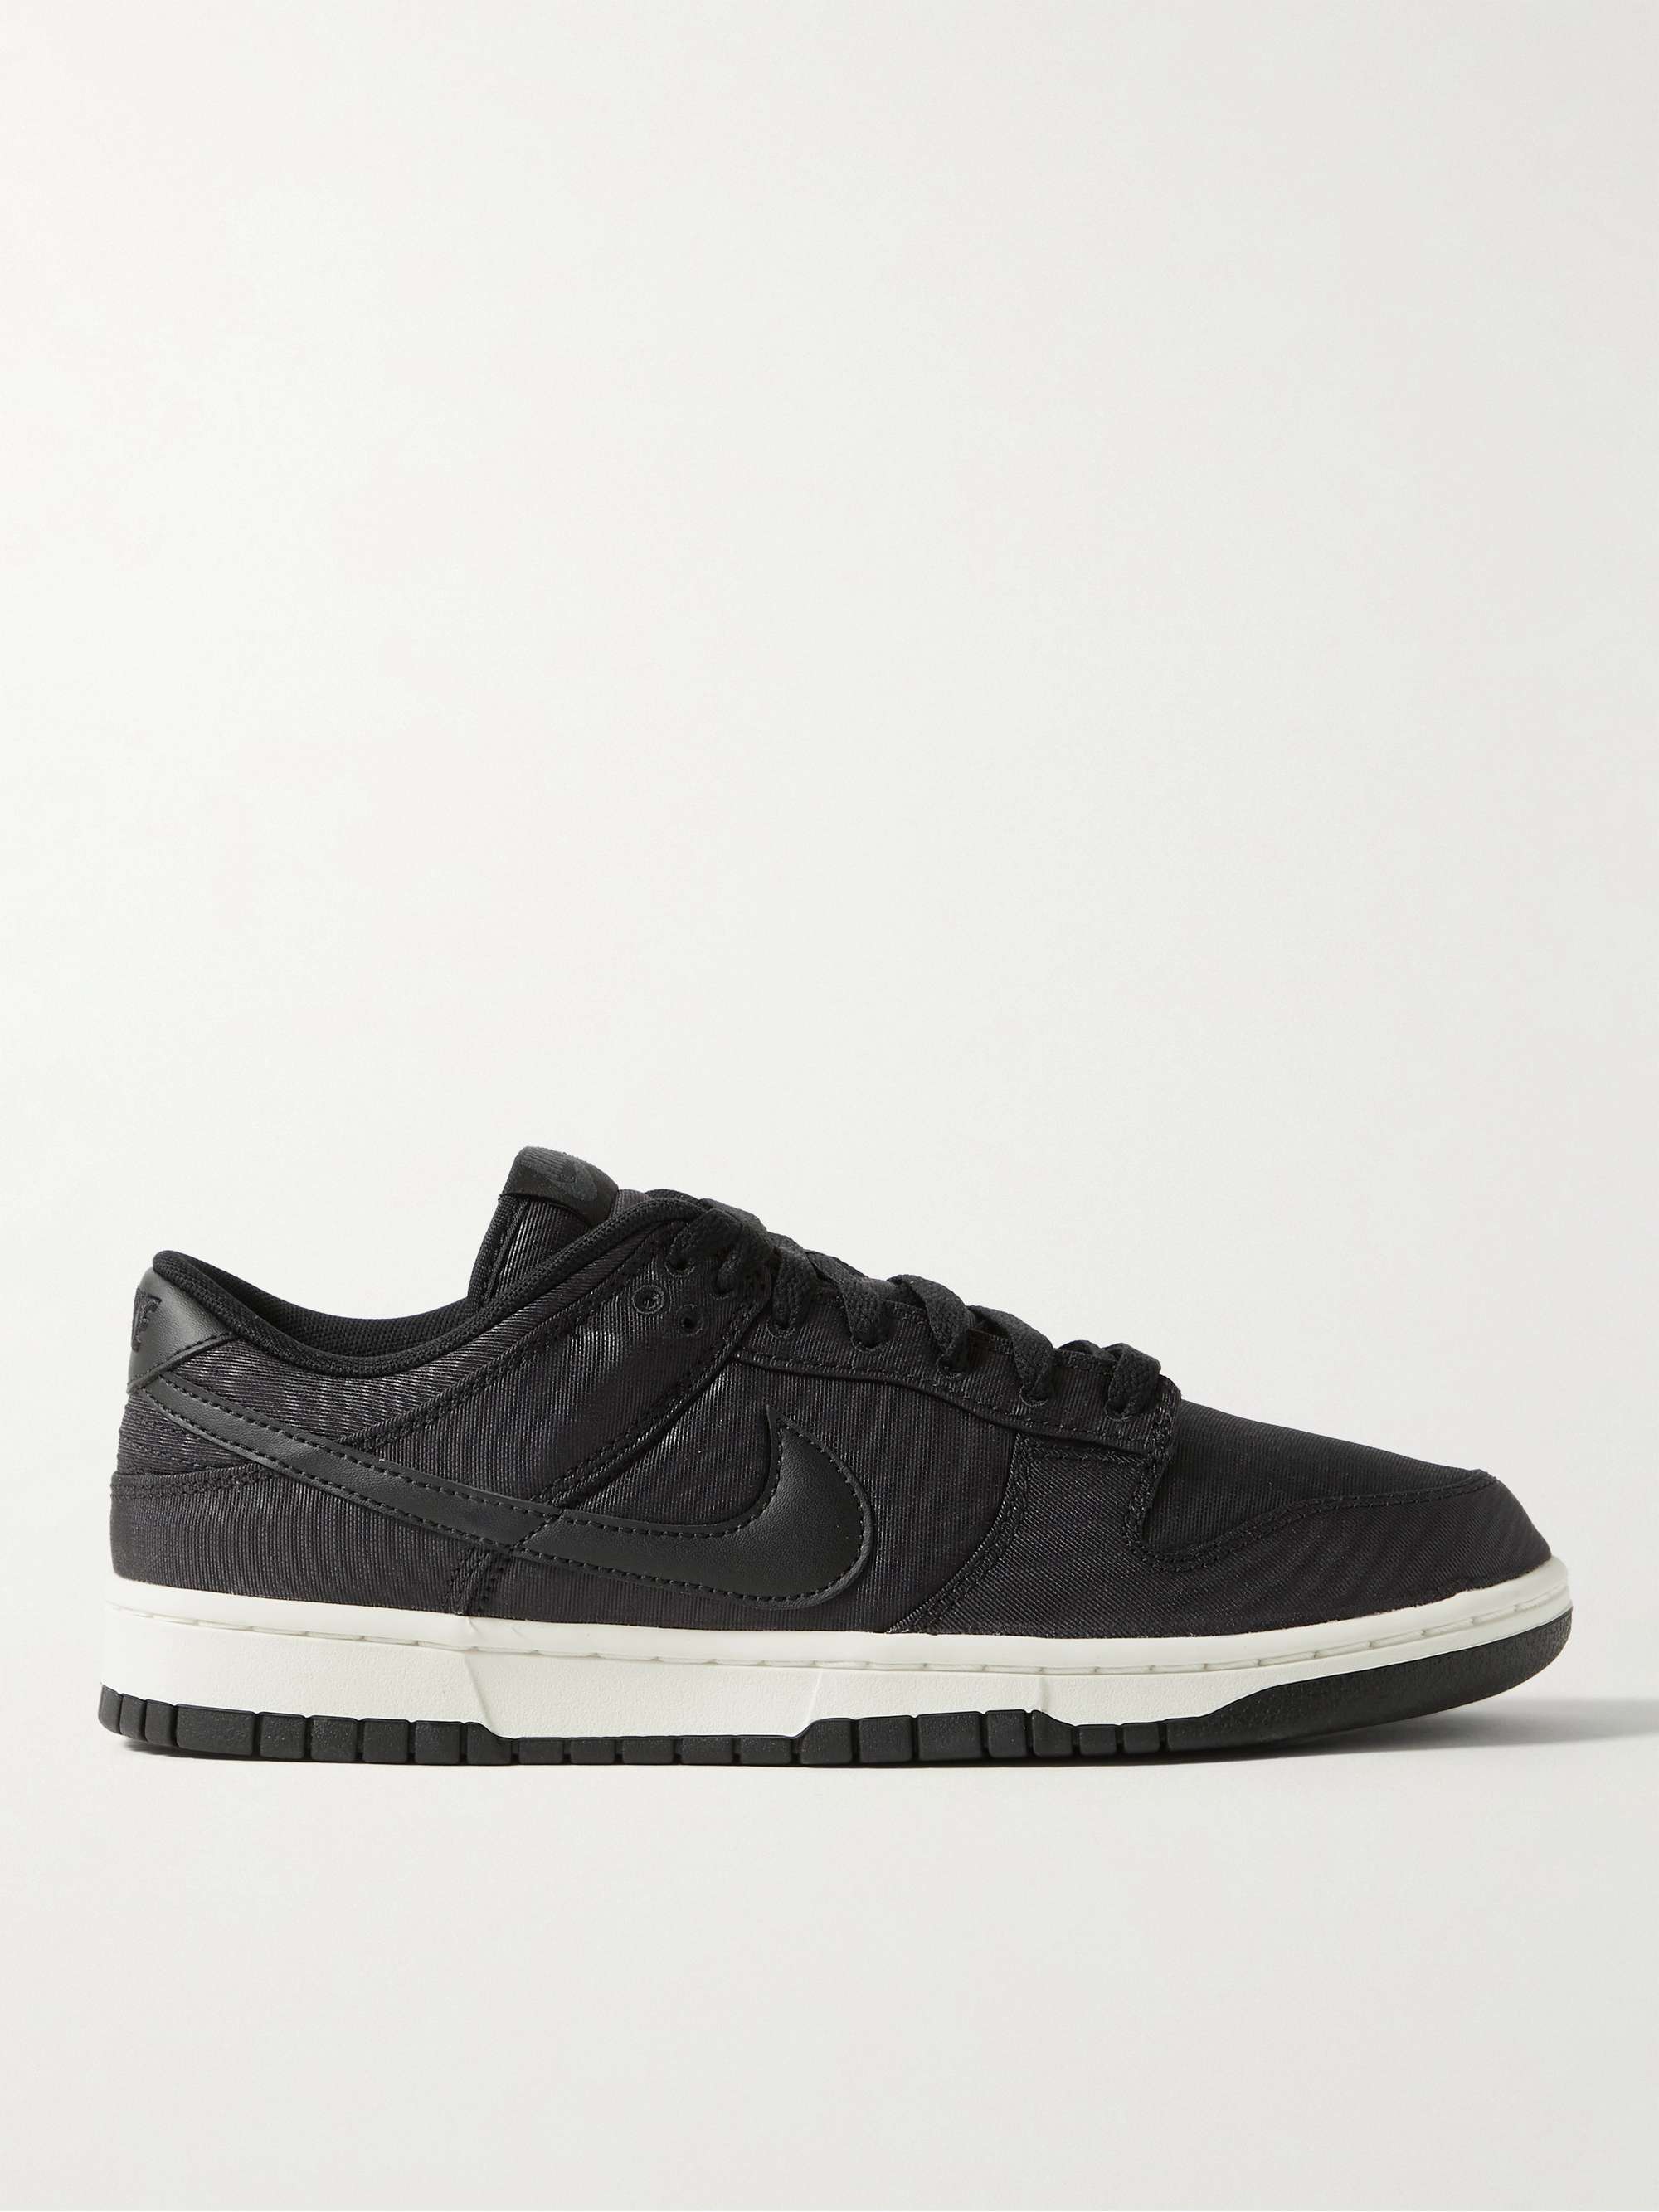 NIKE Dunk Low Retro PRM Leather-Trimmed Drill Sneakers | MR PORTER